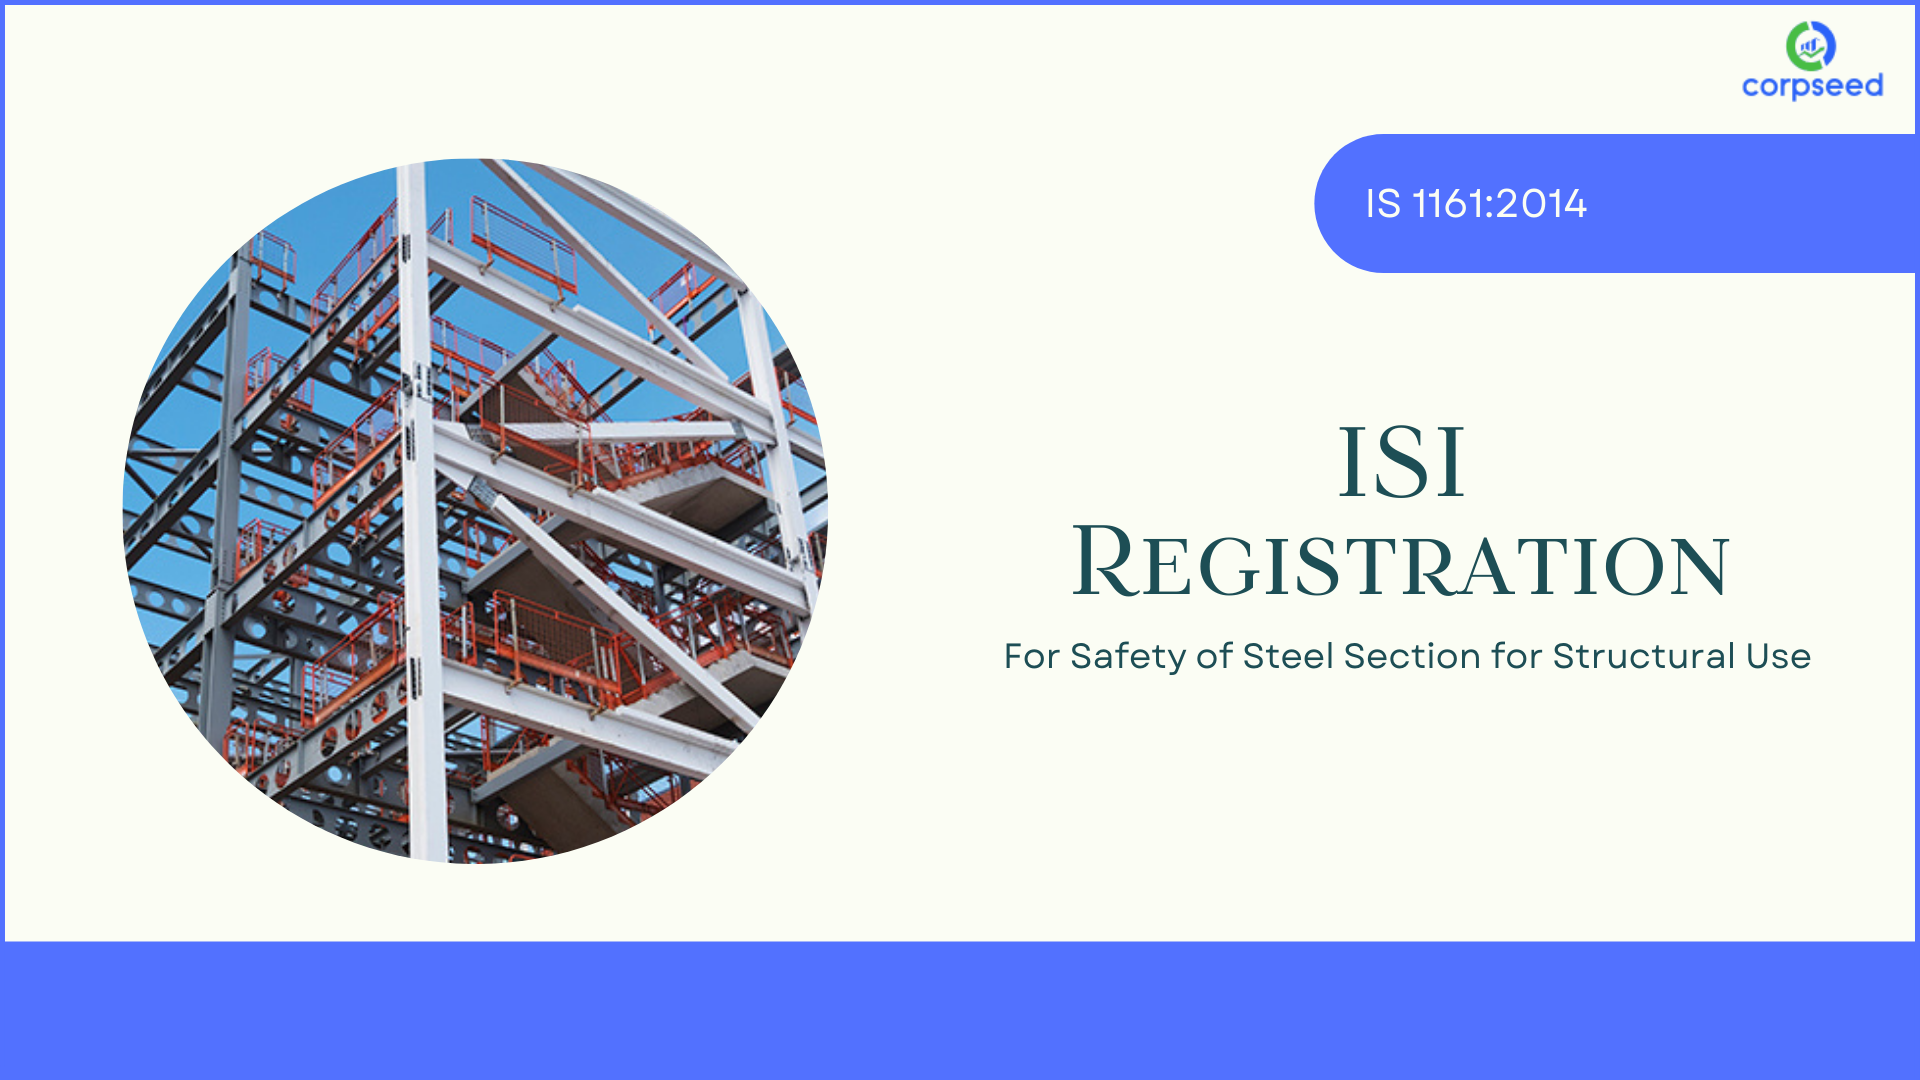 isi-registration-for-safety-of-steel-section-for-structural-use-is-1161-2014_corpseed.png